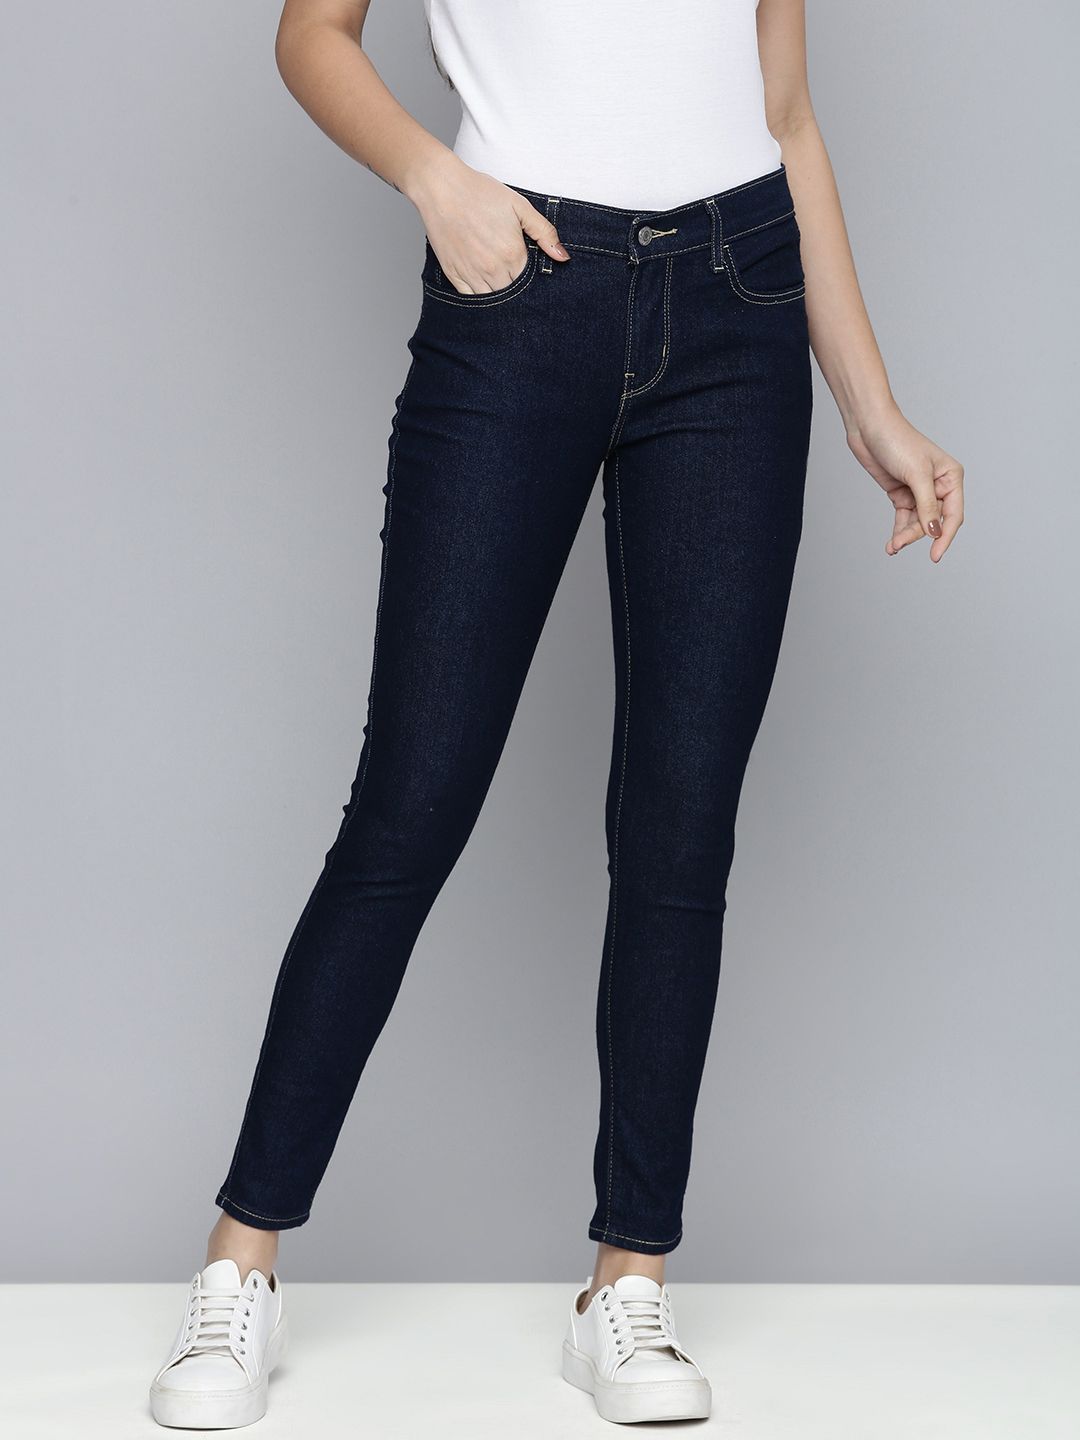 Levis Women Navy Blue 710 Super Skinny Fit Mid-Rise Clean Look Stretchable Jeans Price in India